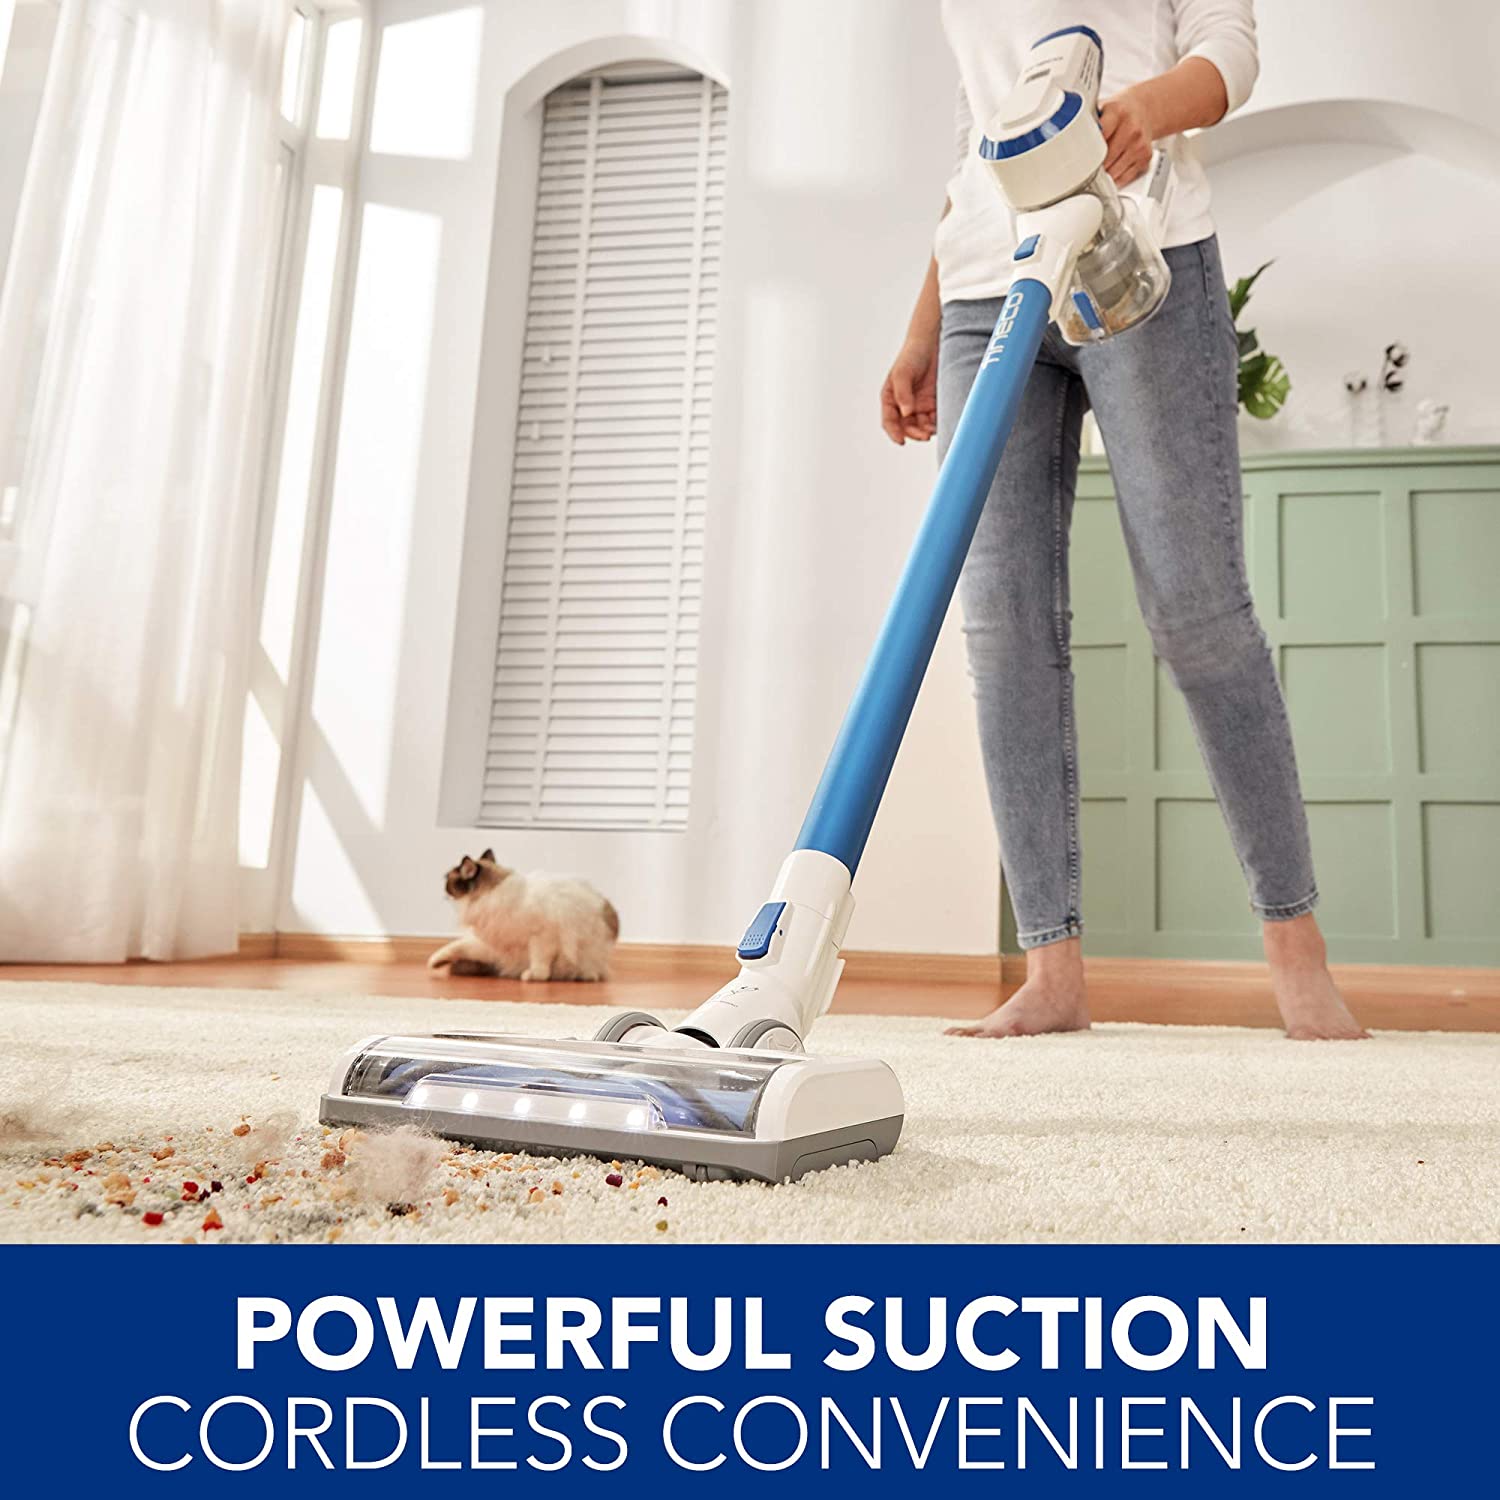 Tineco Full Size LED Soft Roller Hard Floor Power Brush Attachment for A10, A11 Vacuum Cleaners